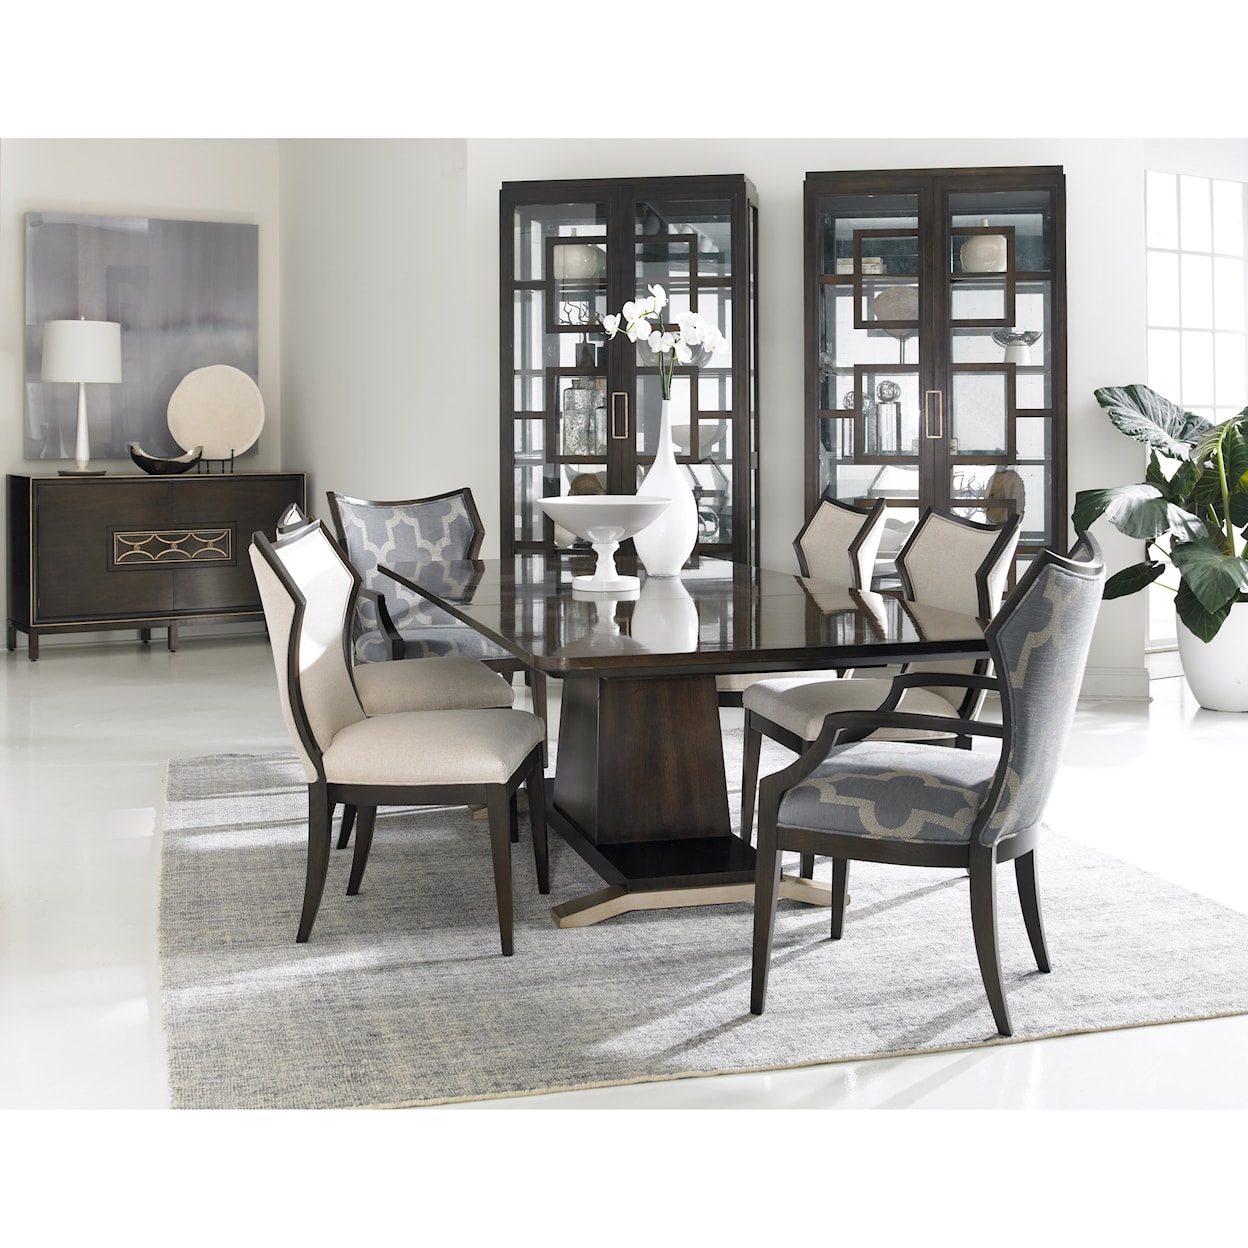 Hickory White Westport Collection Formal Dining Room Group